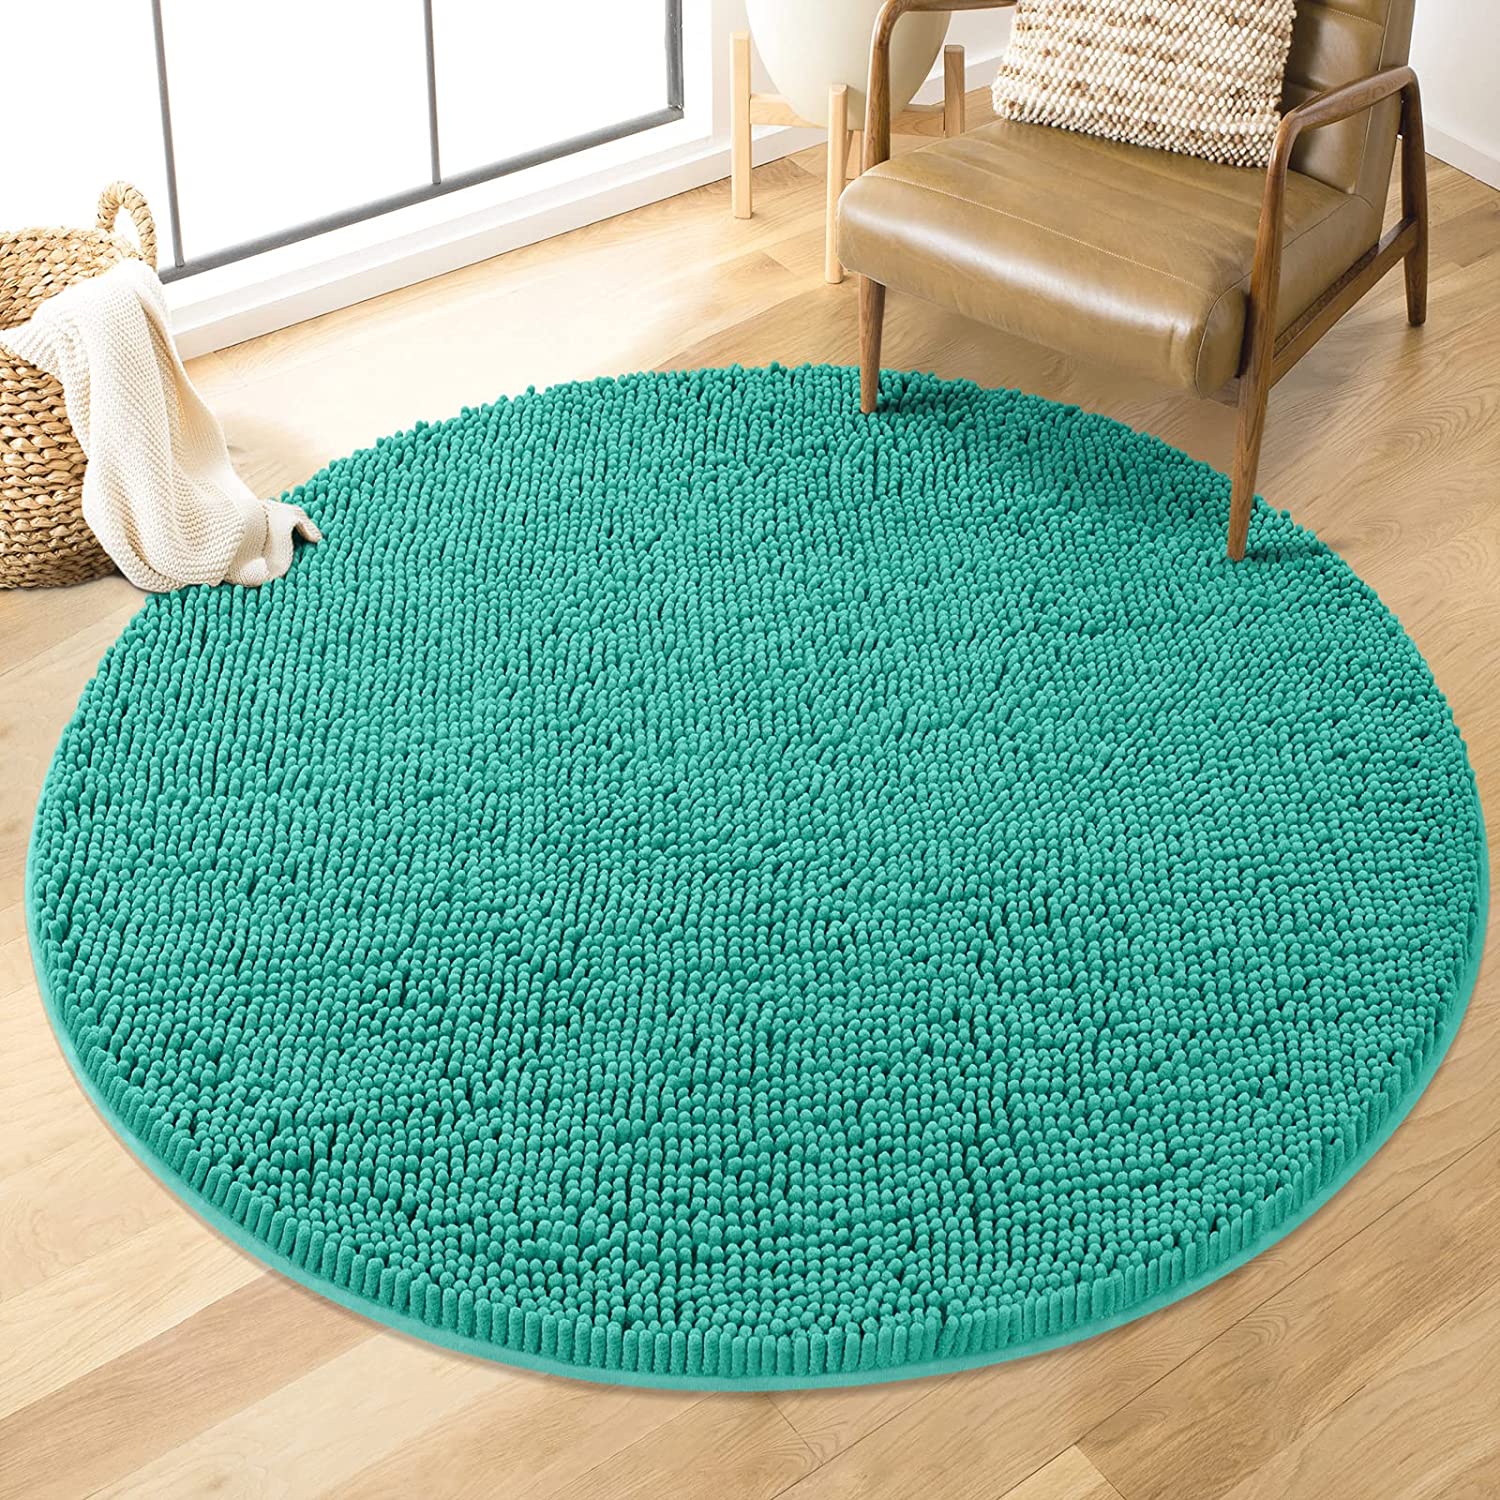 Loopsun Rugs Bathroom Rug,Soft And Comfortable,Puffy And Durable Thick Bath  Mat,Machine Washable Bathroom Mats,Non-Slip Bathroom Rugs For Shower And  Under Sink for Kitchen and Hallway Mats 